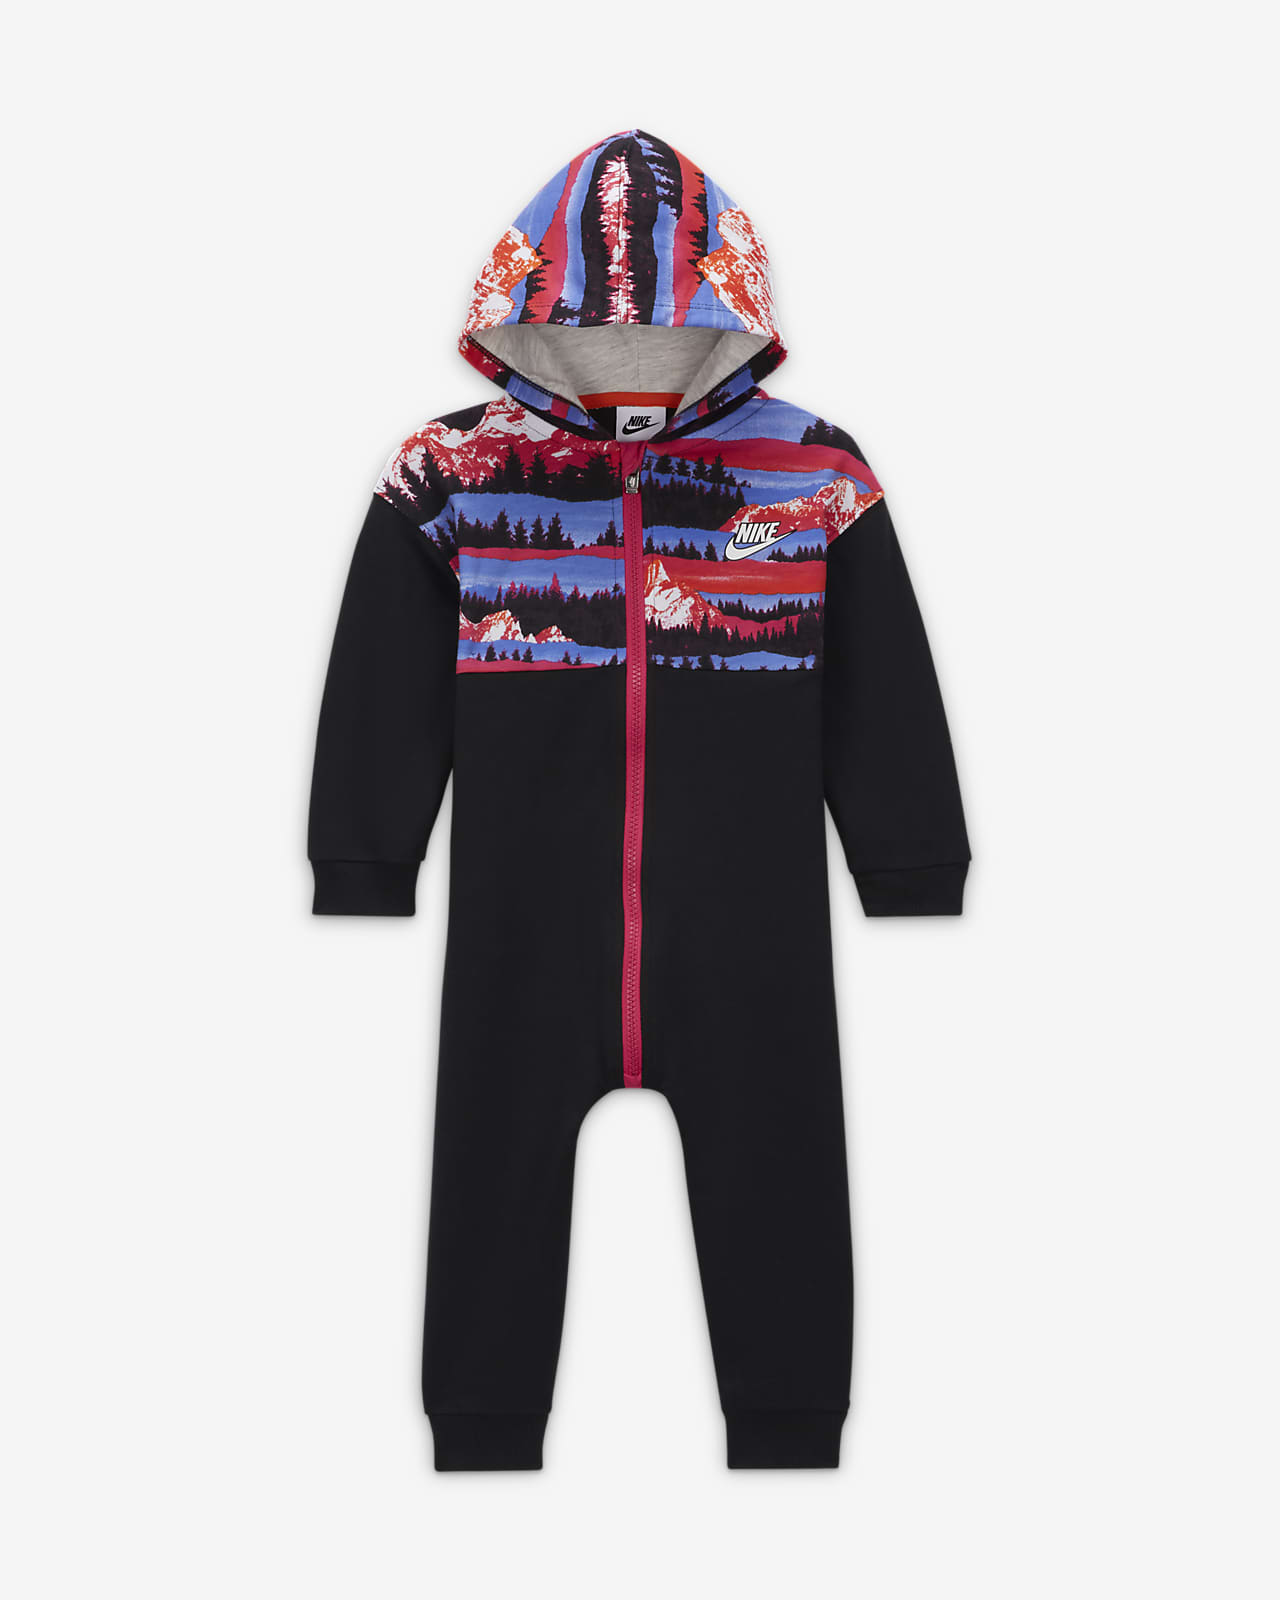 Nike Sportswear Snow Day Hooded Coverall Baby Coverall